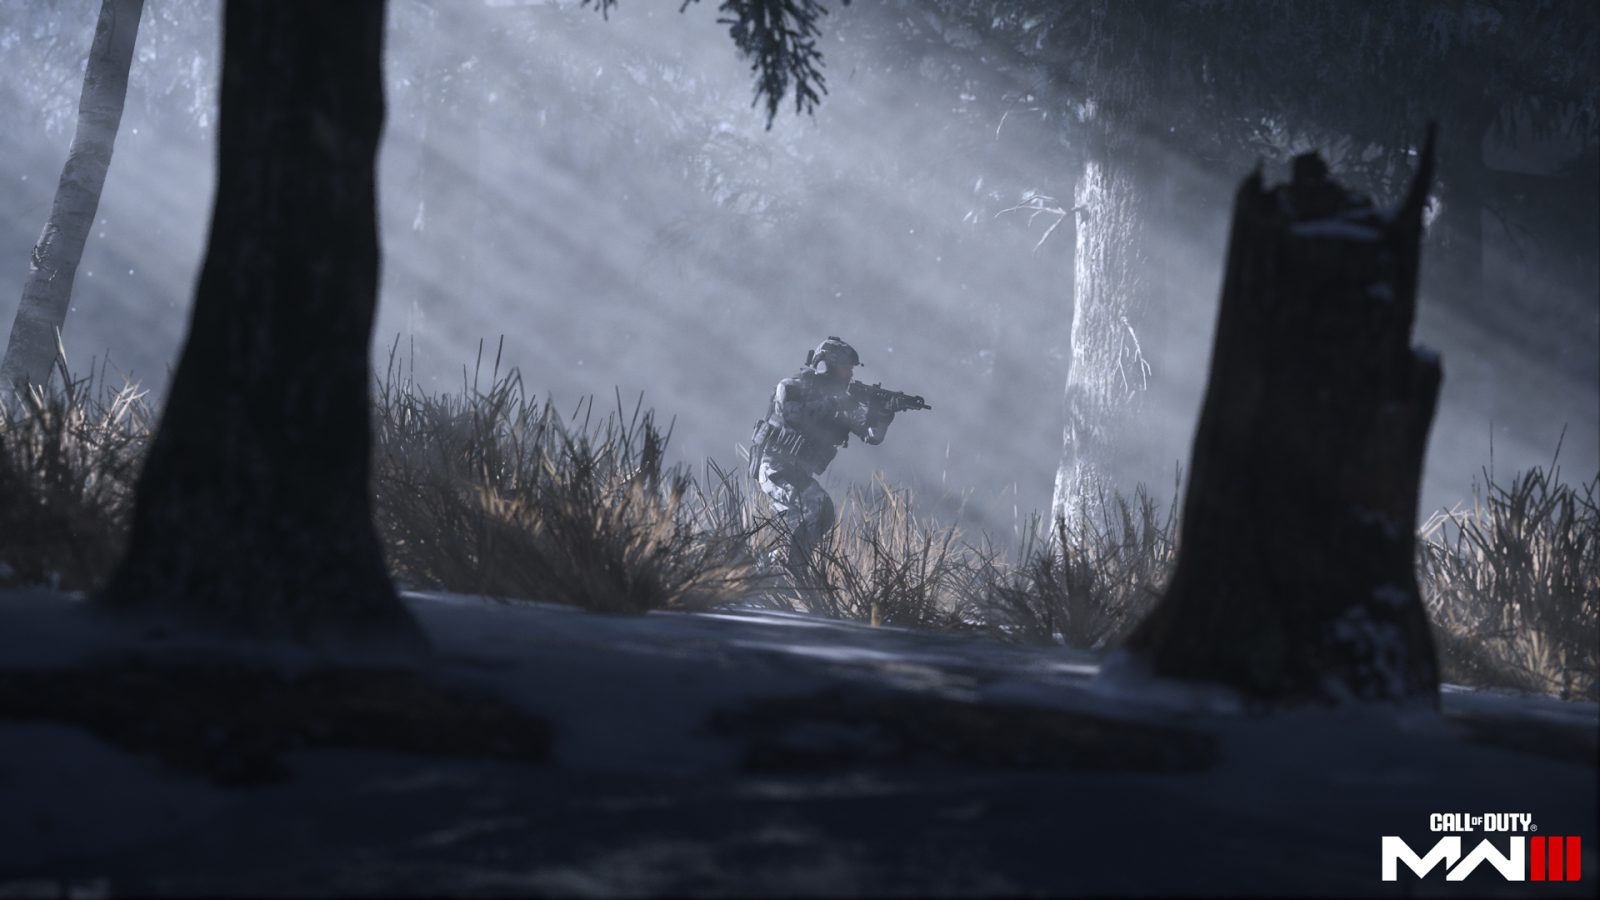 New Call of Duty: Modern Warfare II gameplay trailer released, pre-order  info detailed — GAMINGTREND